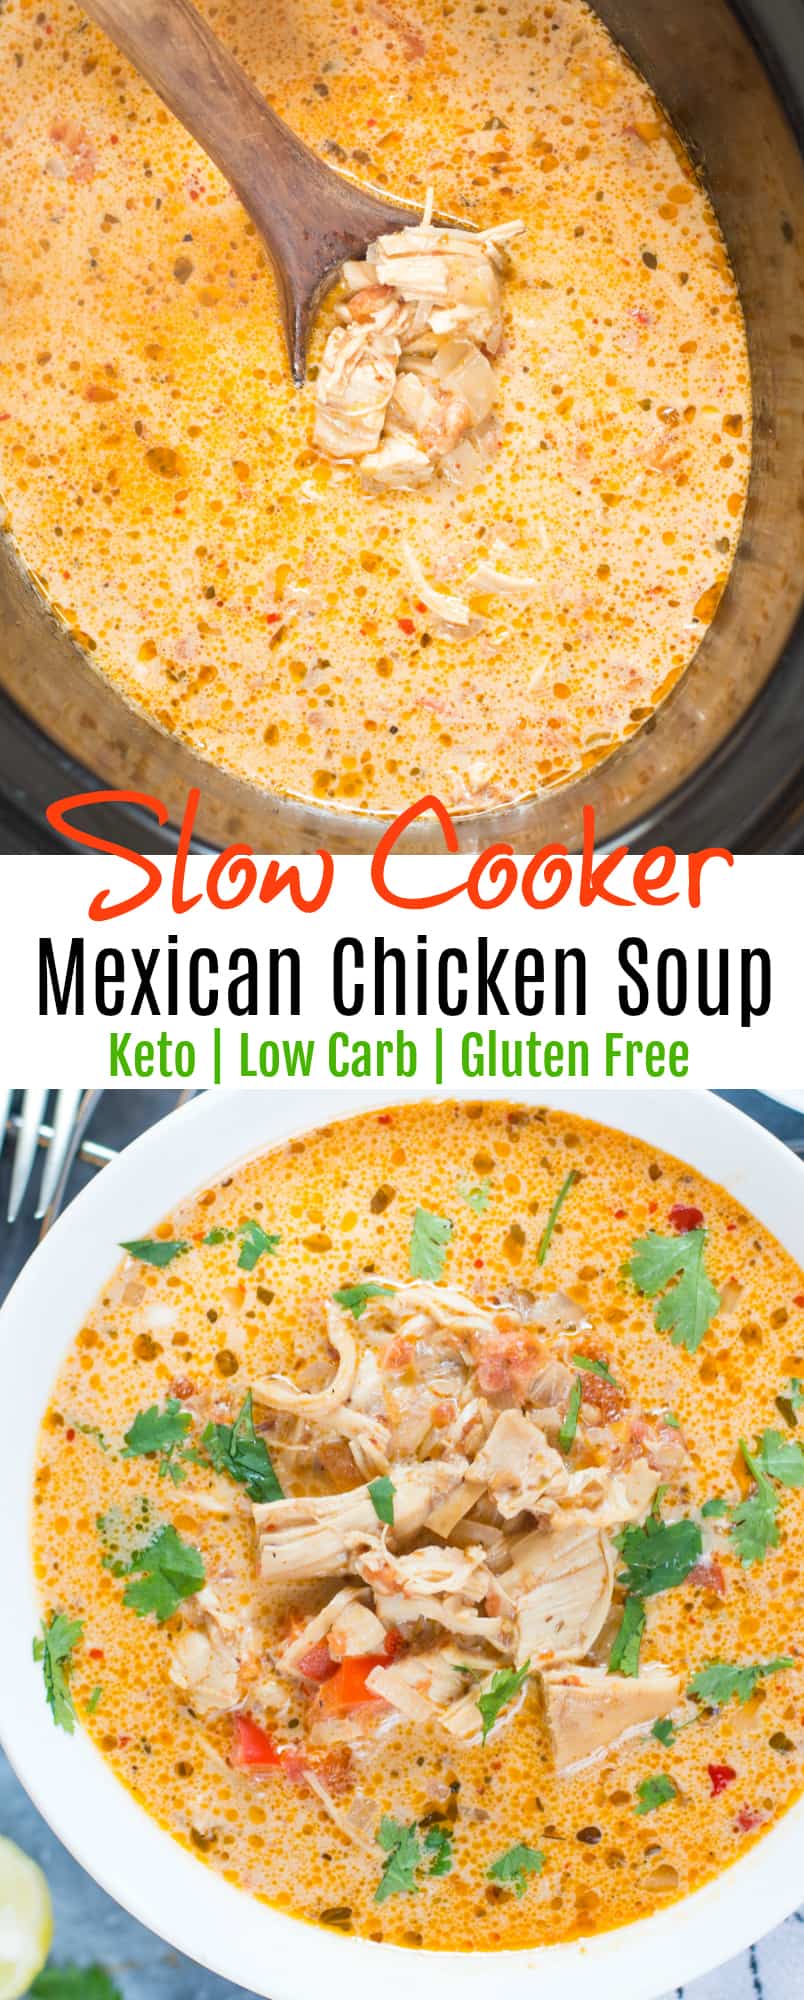 Slow Cooker Mexican Chicken Soup | The flavours of kitchen